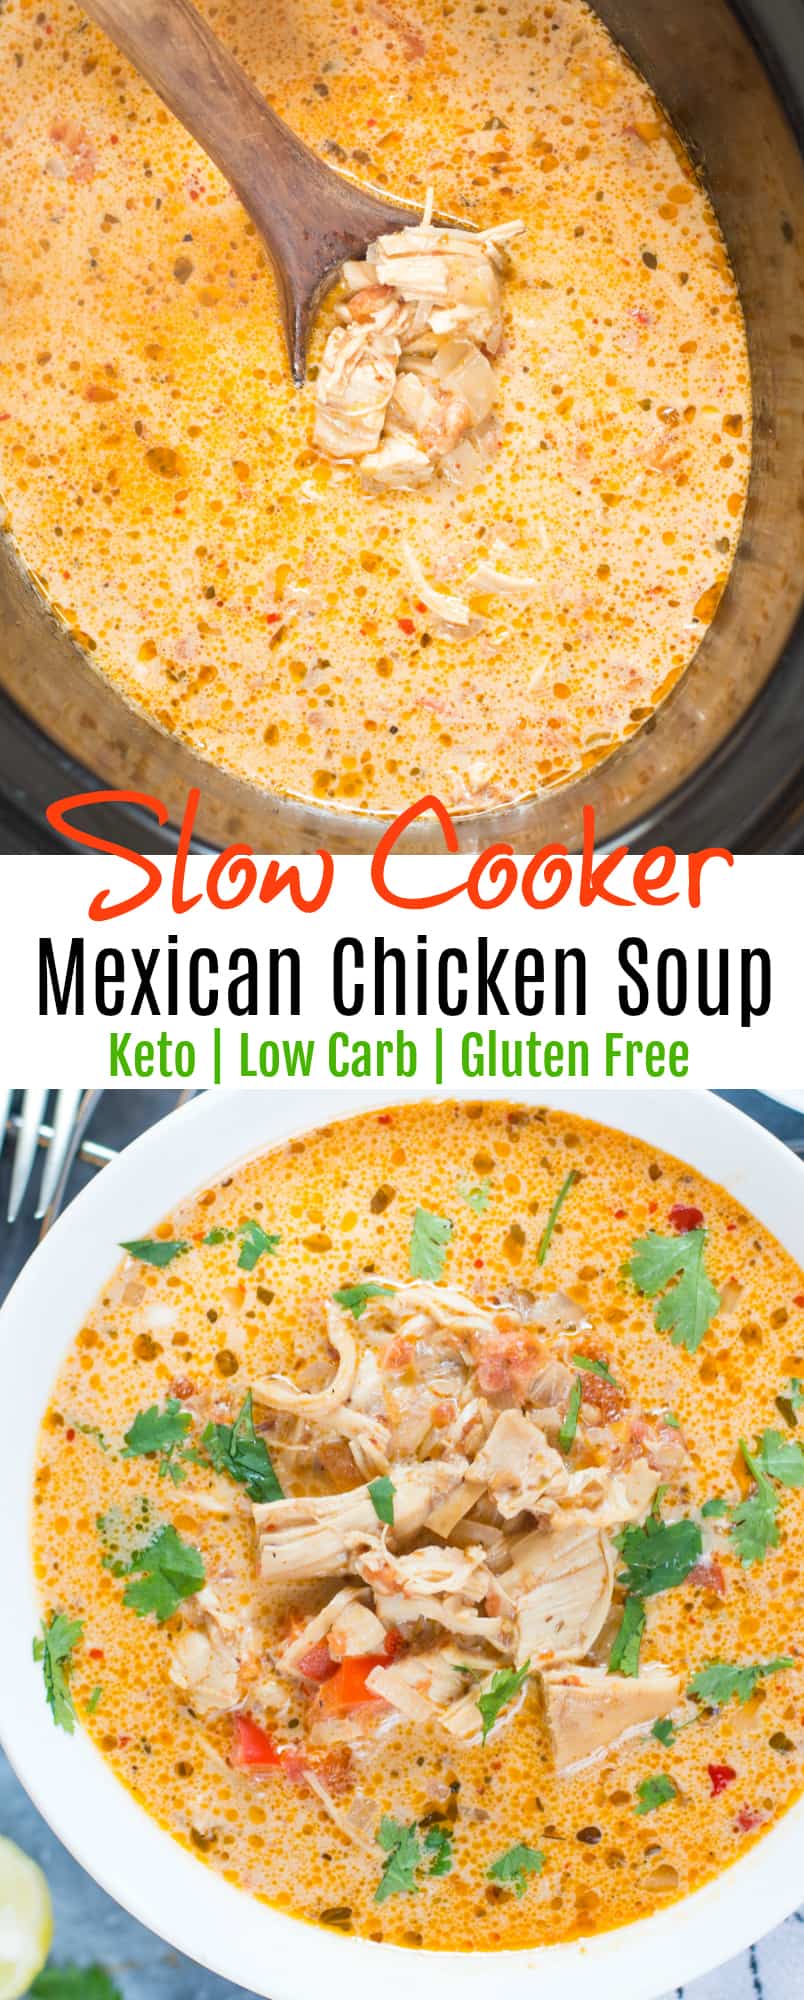 Slow Cooker Mexican Chicken Soup | The flavours of kitchen